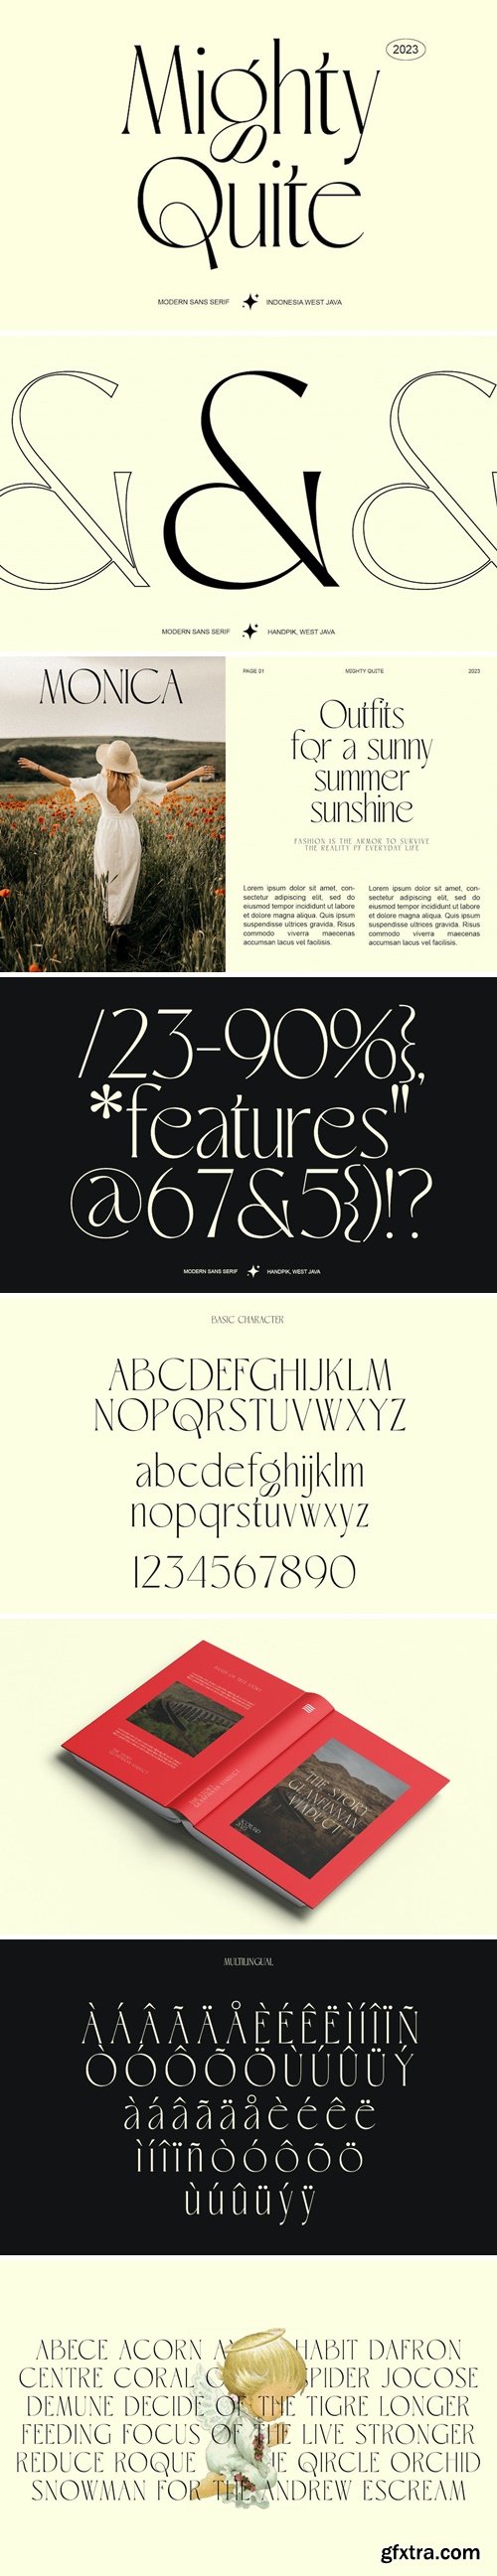 Mighty Quite Font